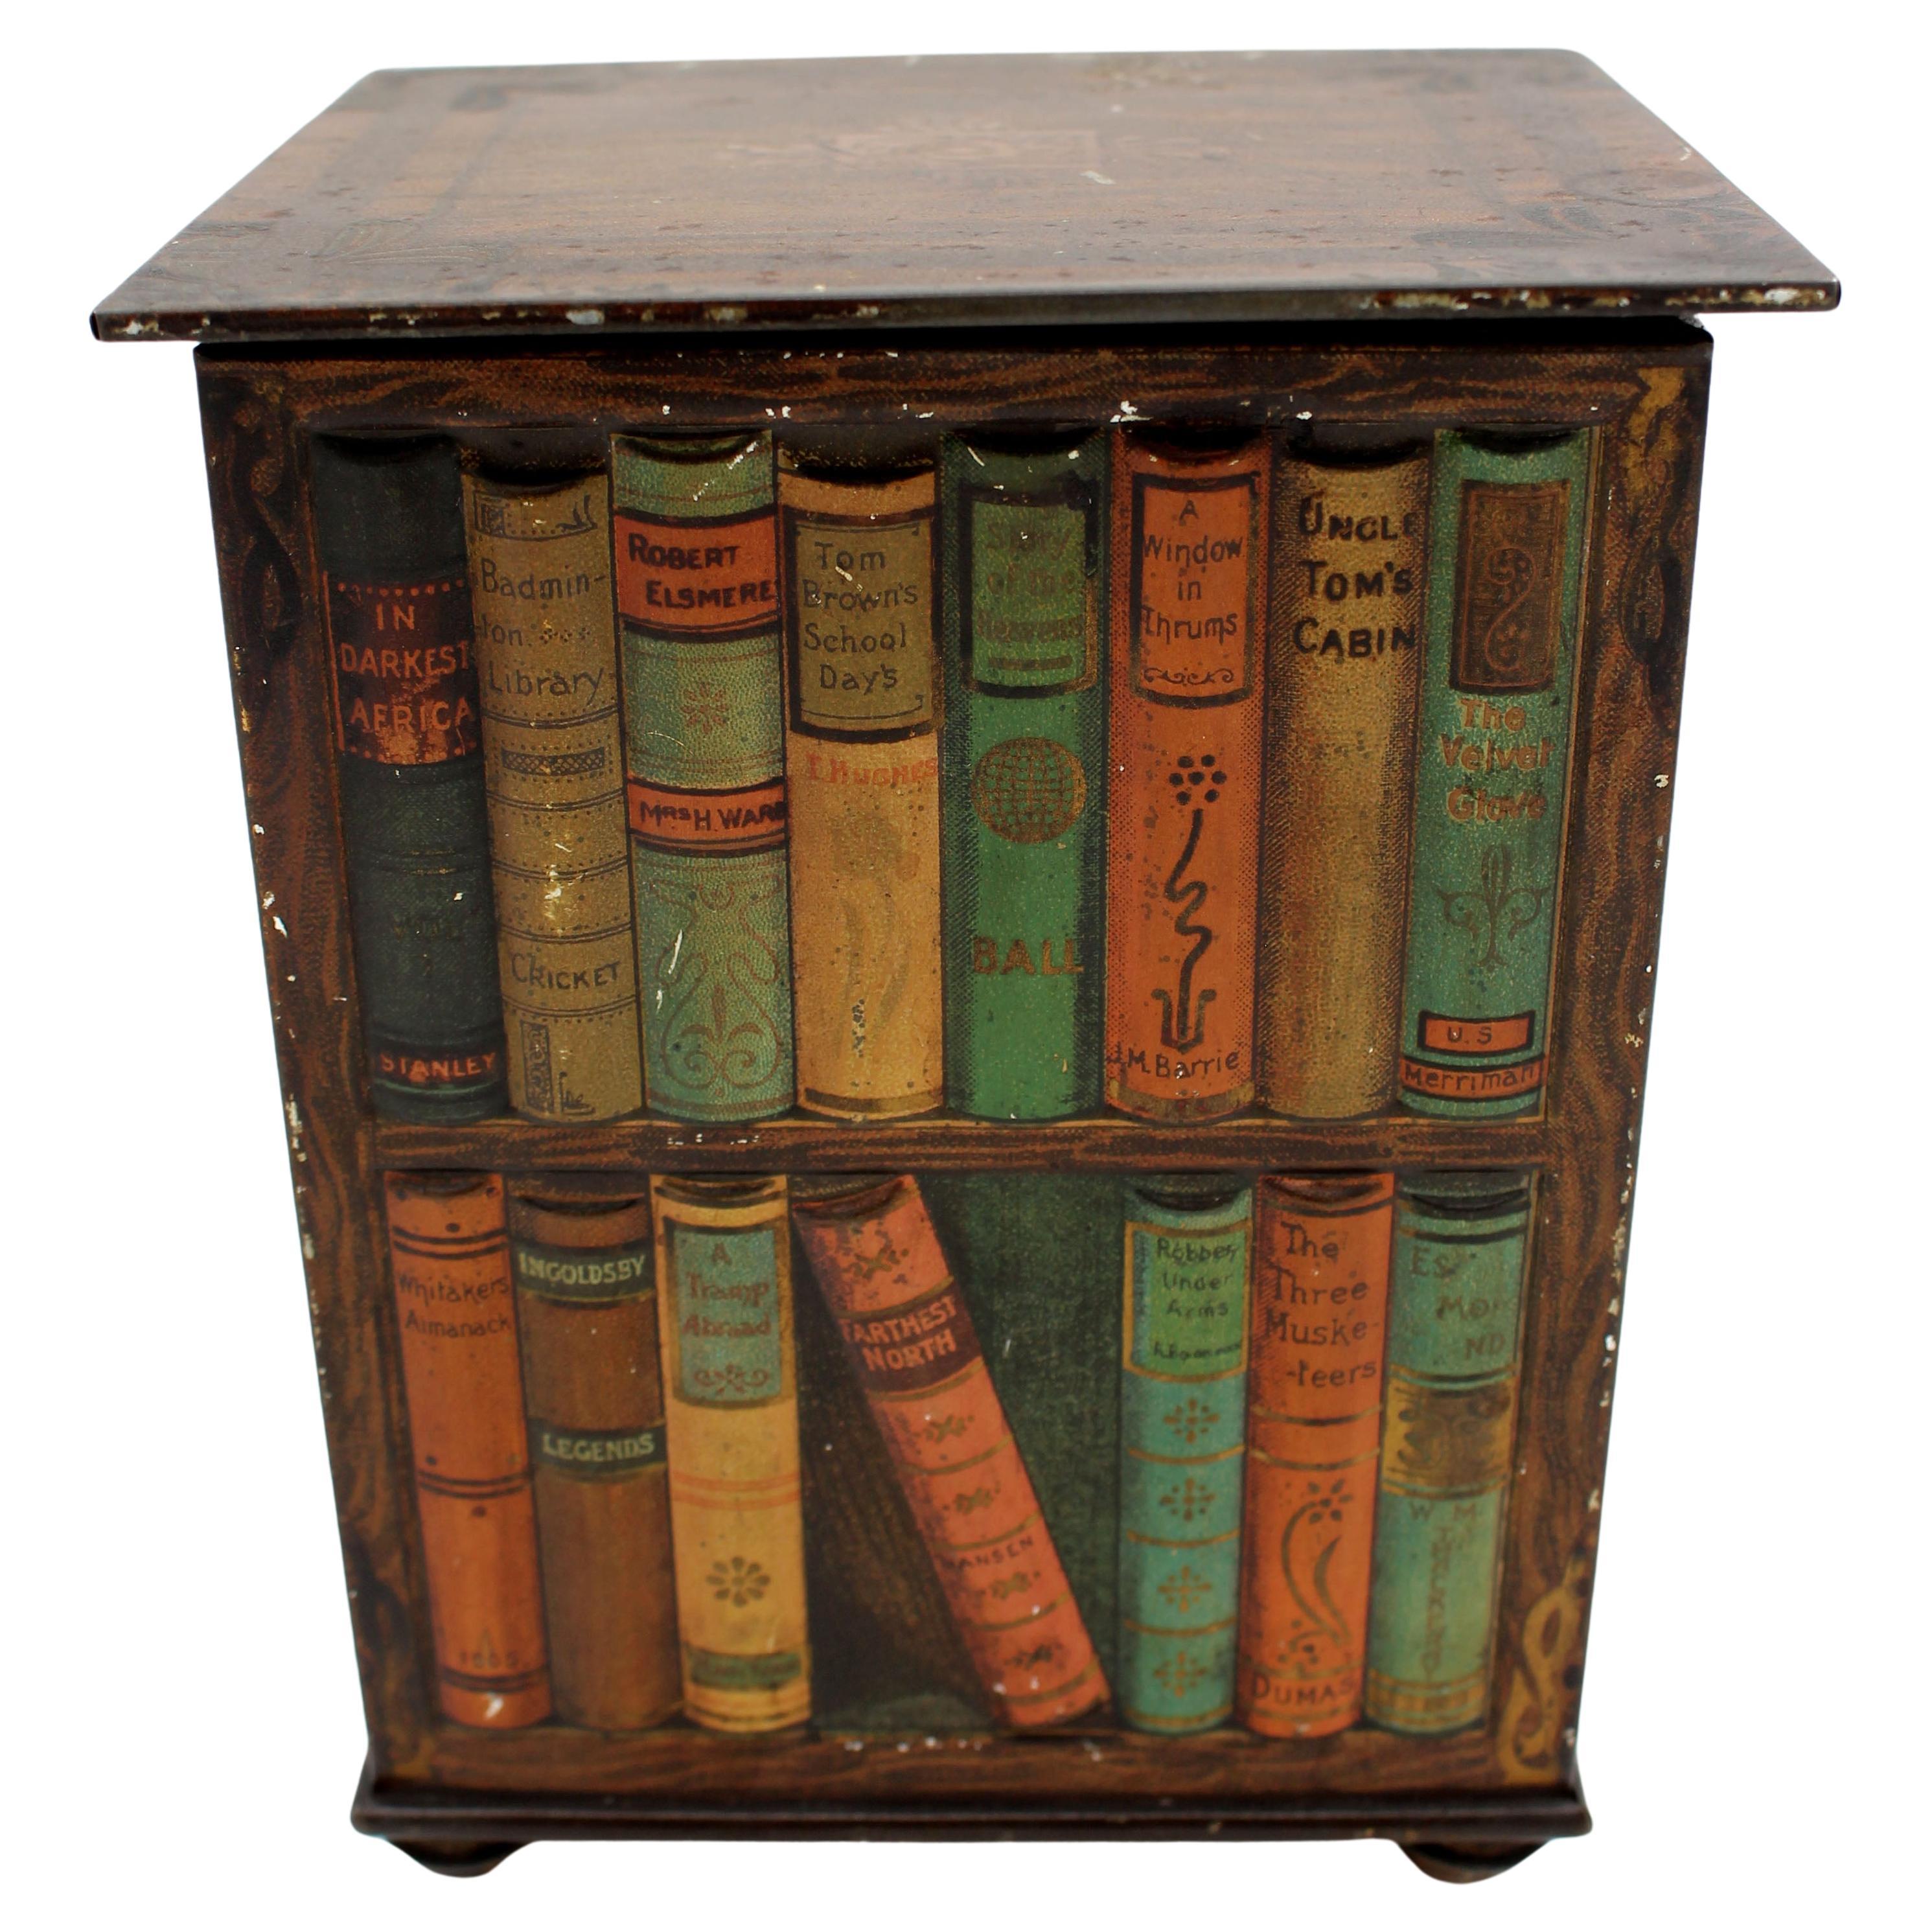 Faux Revolving Bookcase Biscuit Tin Box by Huntley & Palmers, 1905, English For Sale